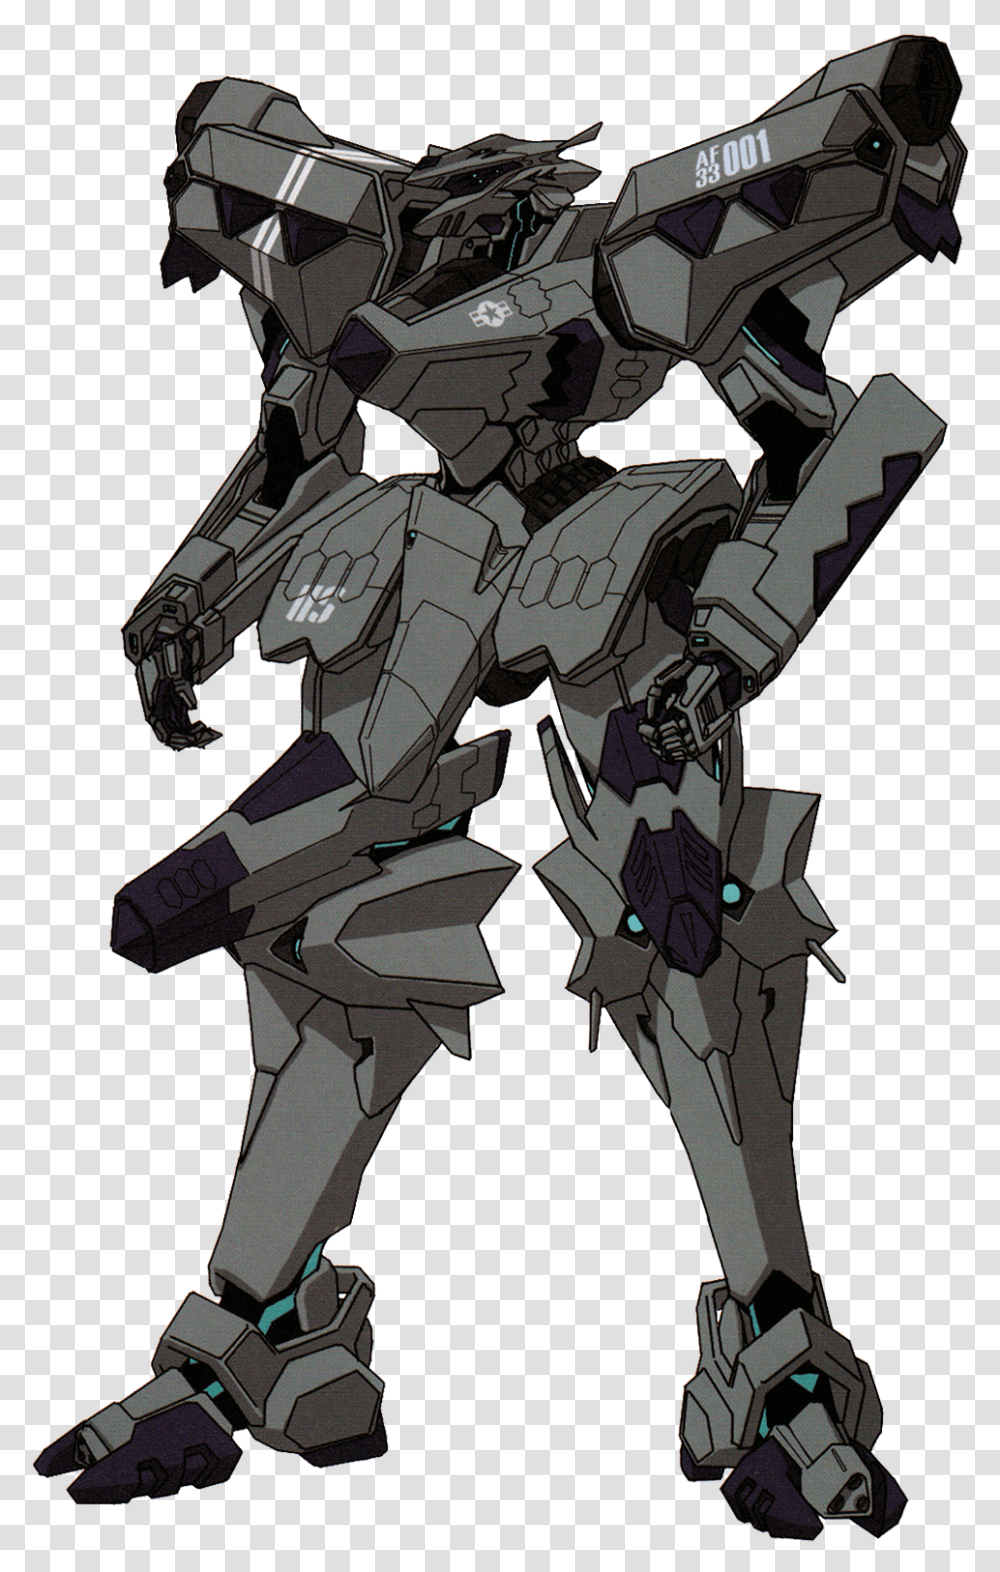 F 22a F 22 Raptor Muv Luv, Gun, Weapon, Weaponry, Armor Transparent Png